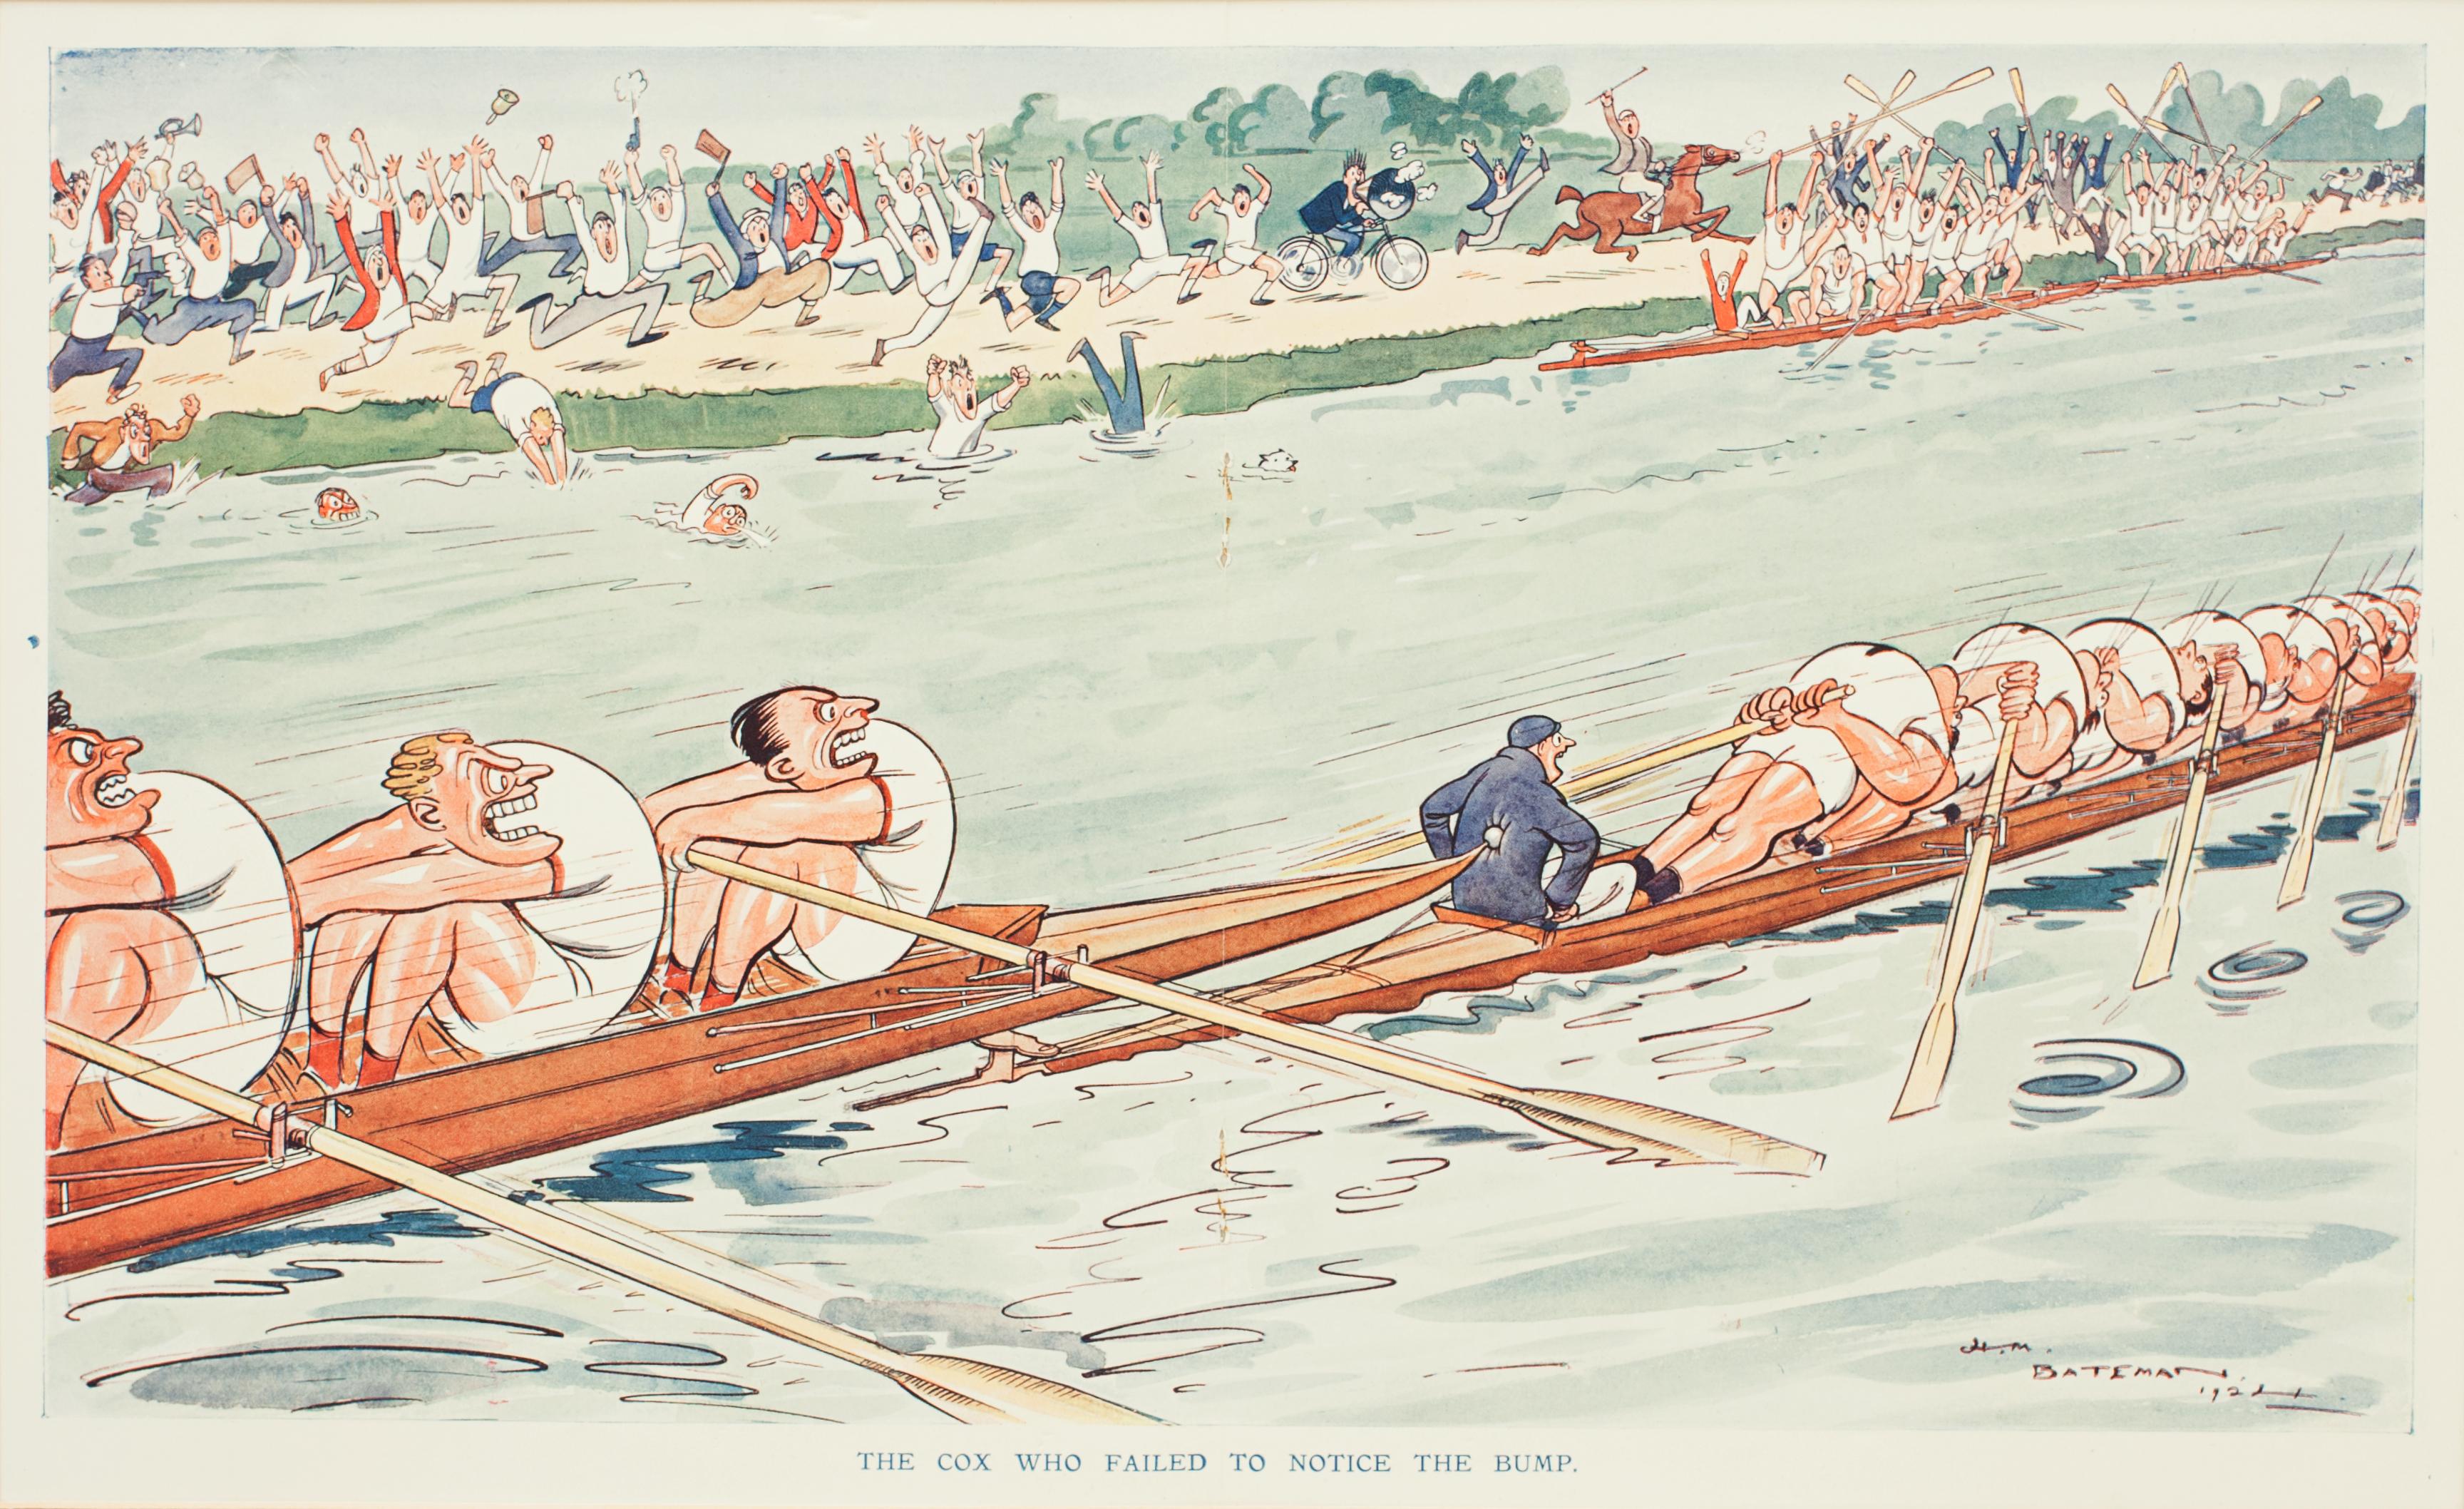 Humorous, punch rowing print, The Cox Who Failed To Notice The Bump.
A colorful humorous rowing lithograph by the 20th century cartoonist and caricaturist H.M. Bateman (Henry Mayo Bateman, 1887 - 1970).
The rowing picture was published in the June